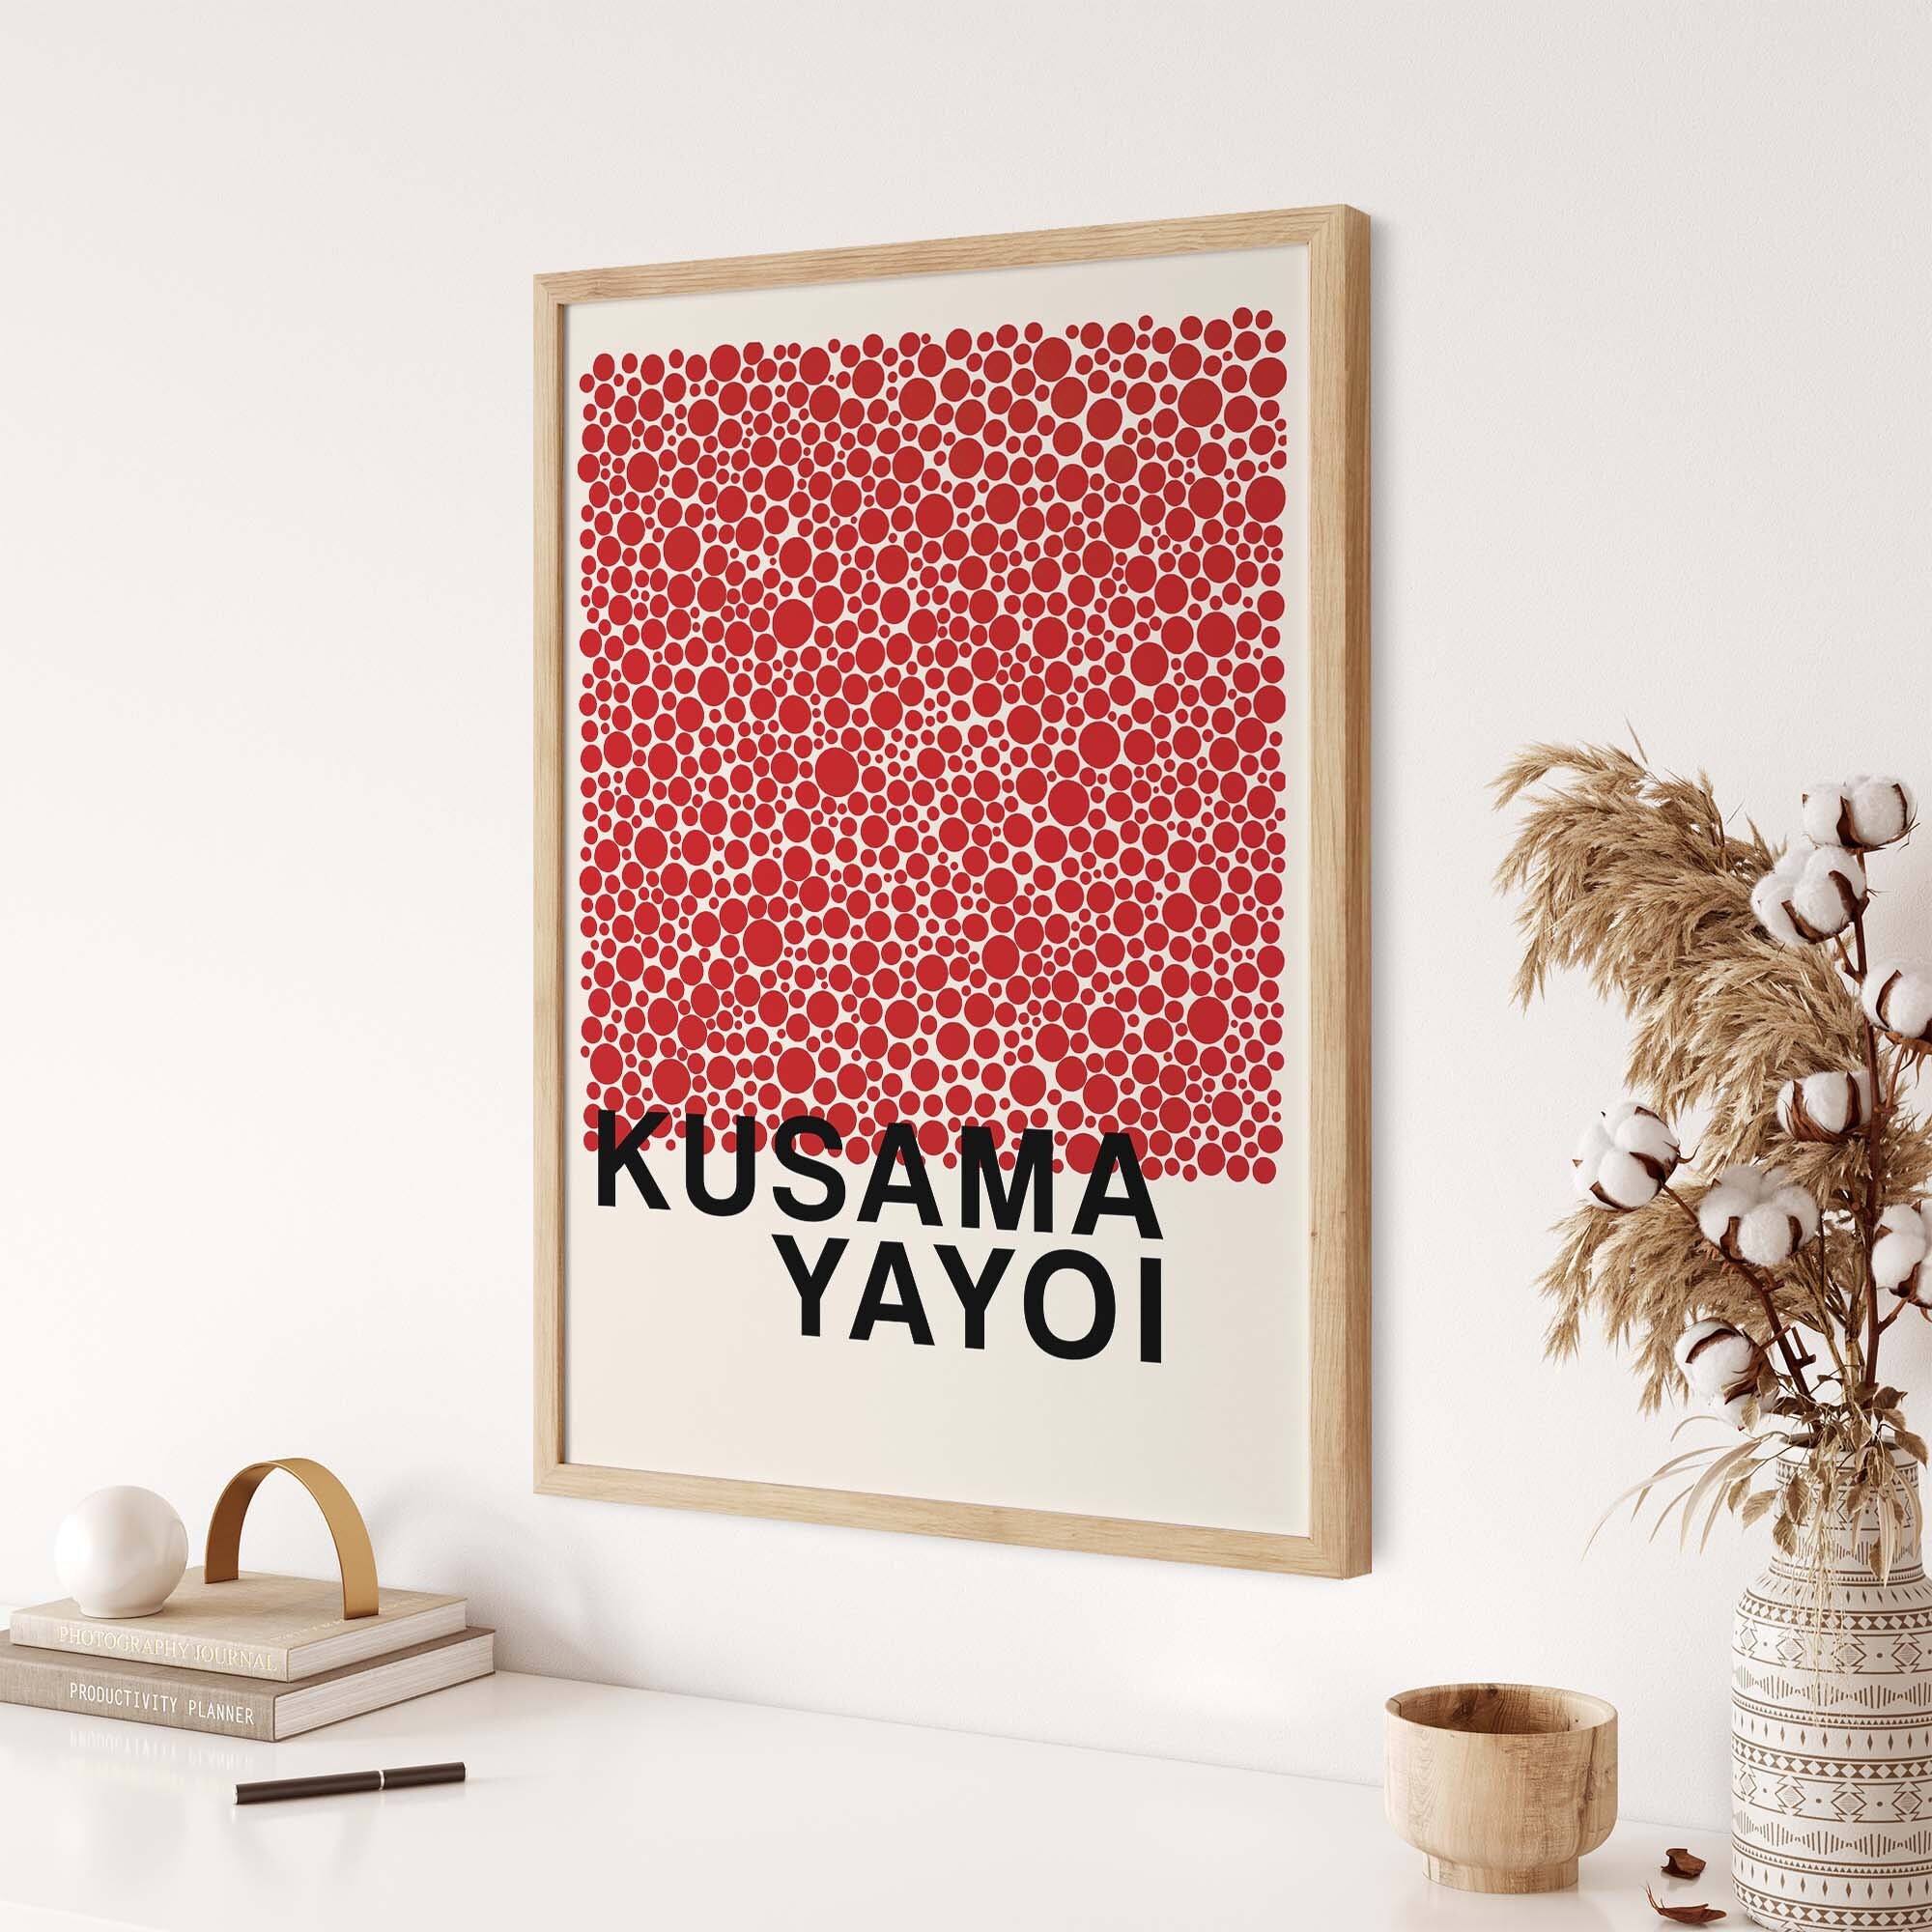 Yayoi Kusama Poster Wall Art Gallery Exhibition Poster Print Red Dots